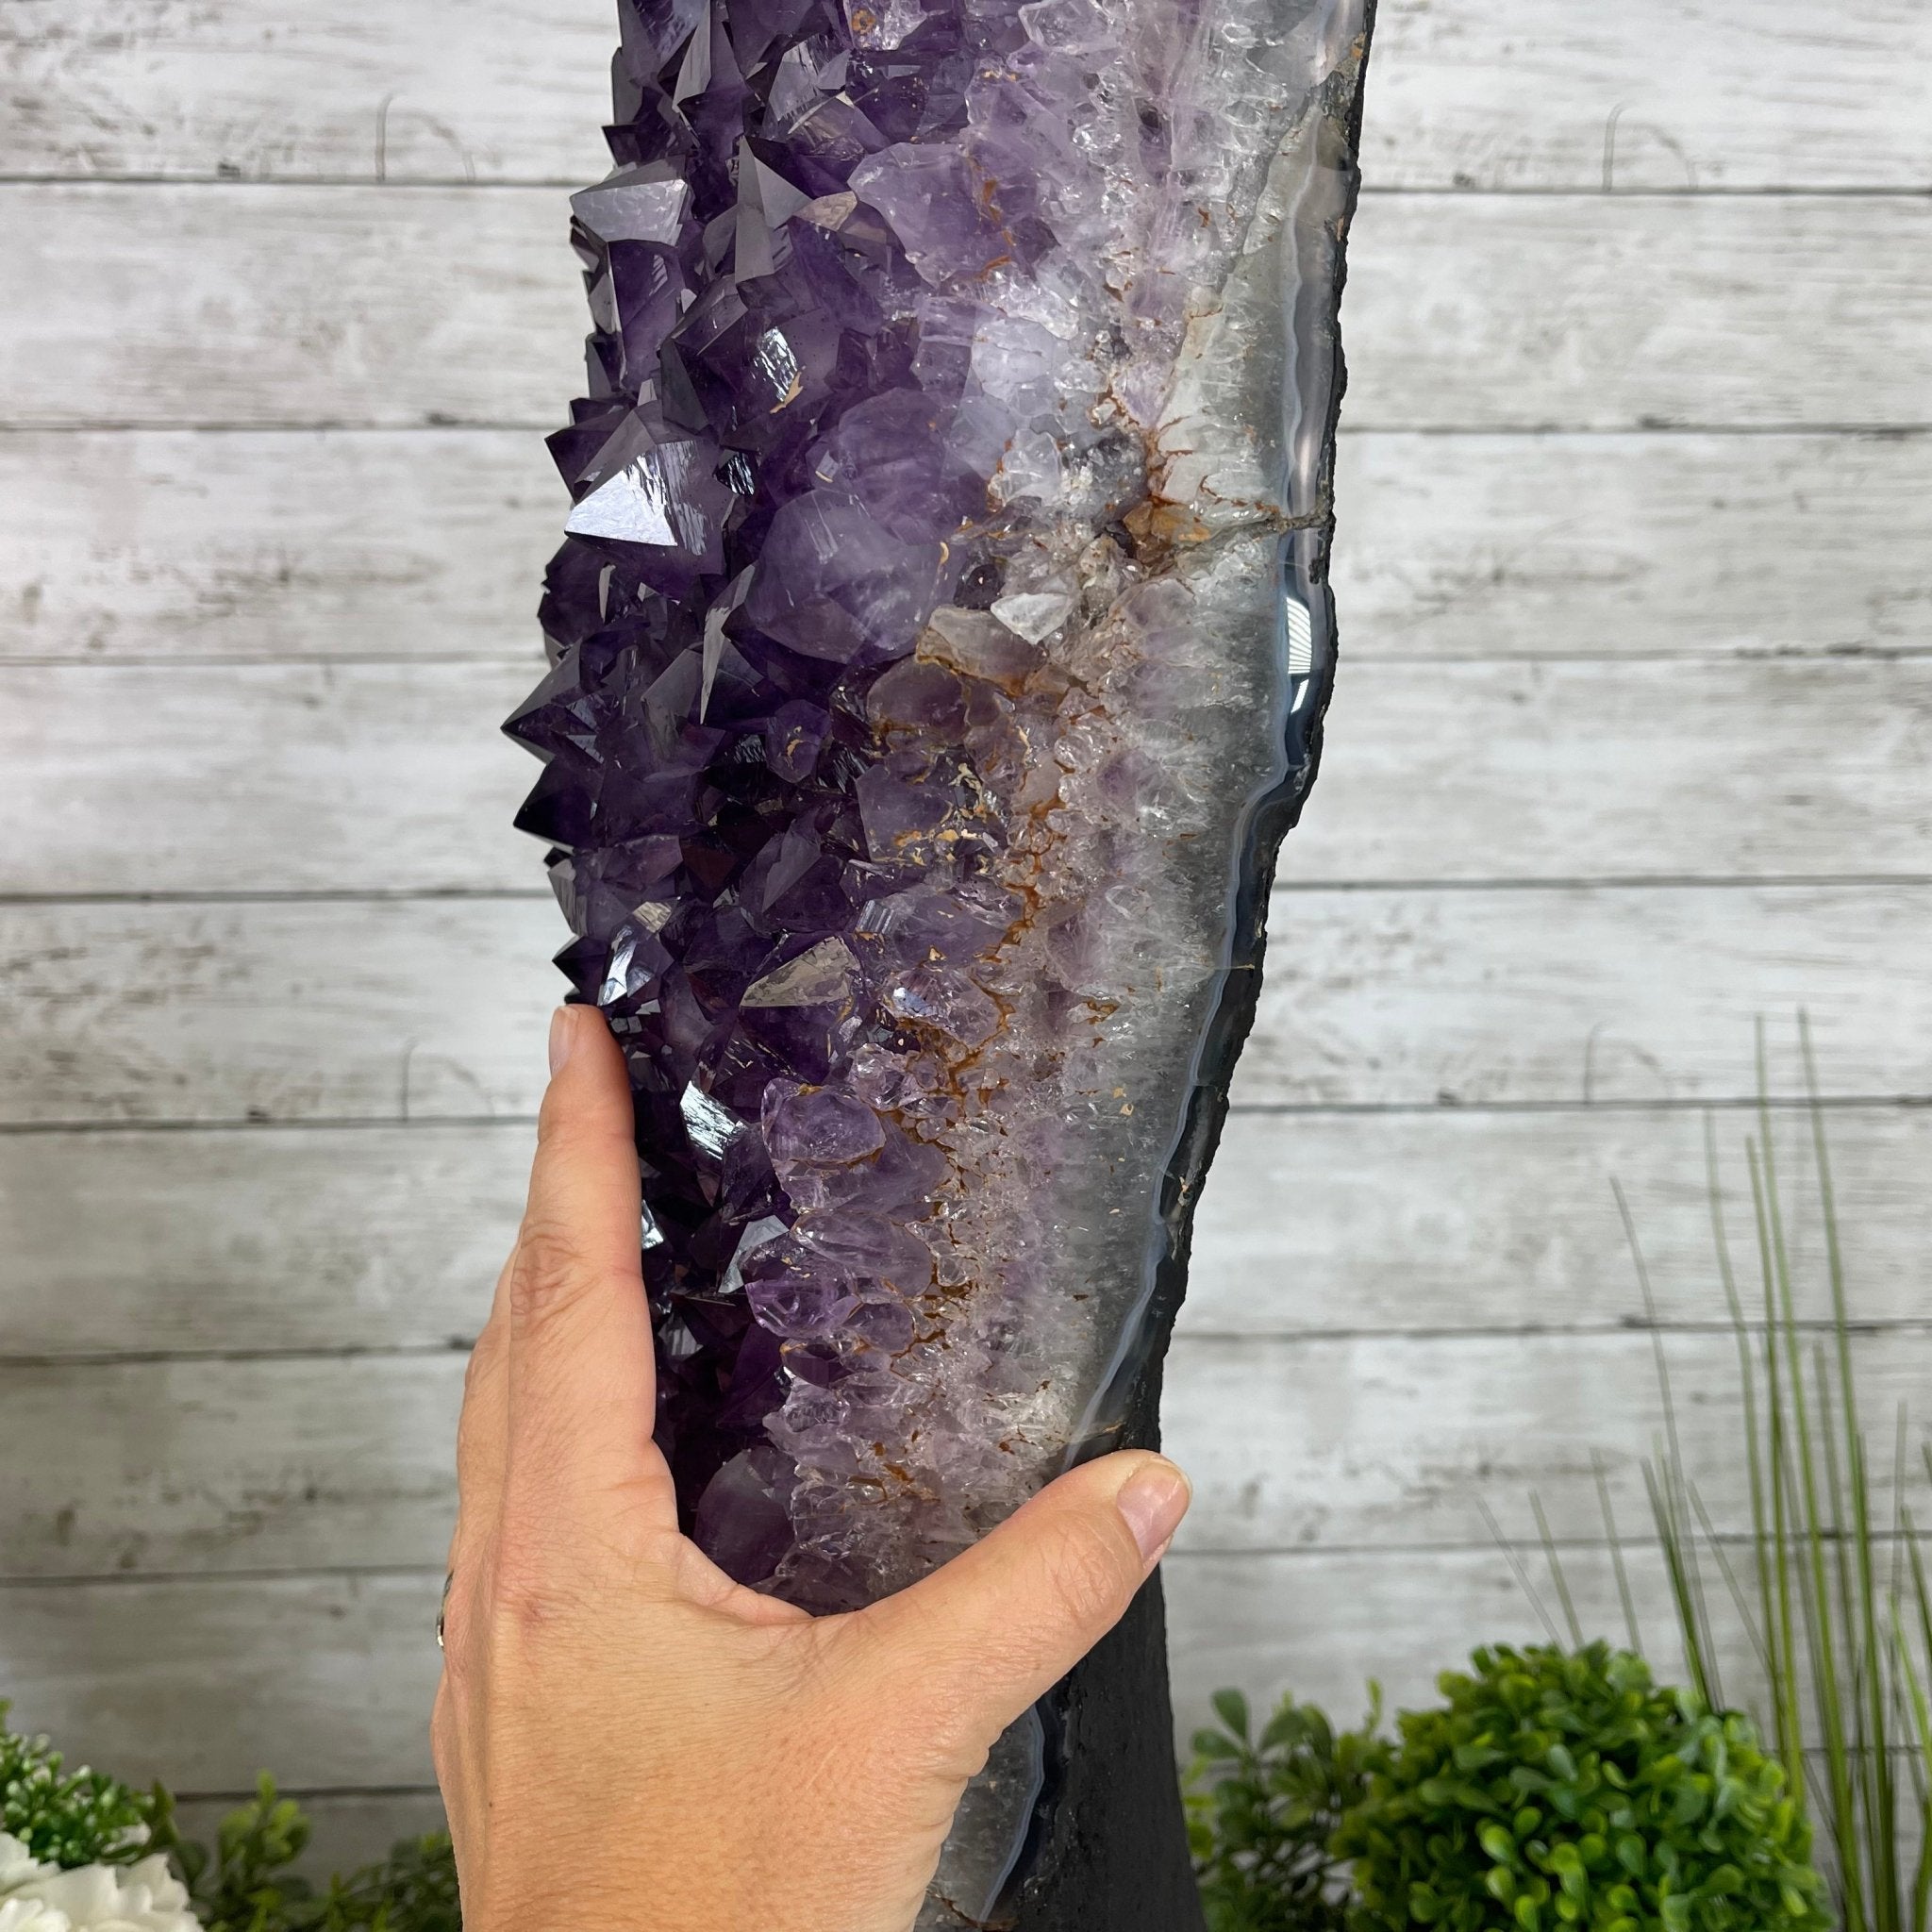 Extra Quality Amethyst Druse Cluster on Cement Base, 82 lbs and 29.3" Tall #5614-0063 - Brazil GemsBrazil GemsExtra Quality Amethyst Druse Cluster on Cement Base, 82 lbs and 29.3" Tall #5614-0063Clusters on Cement Bases5614-0063